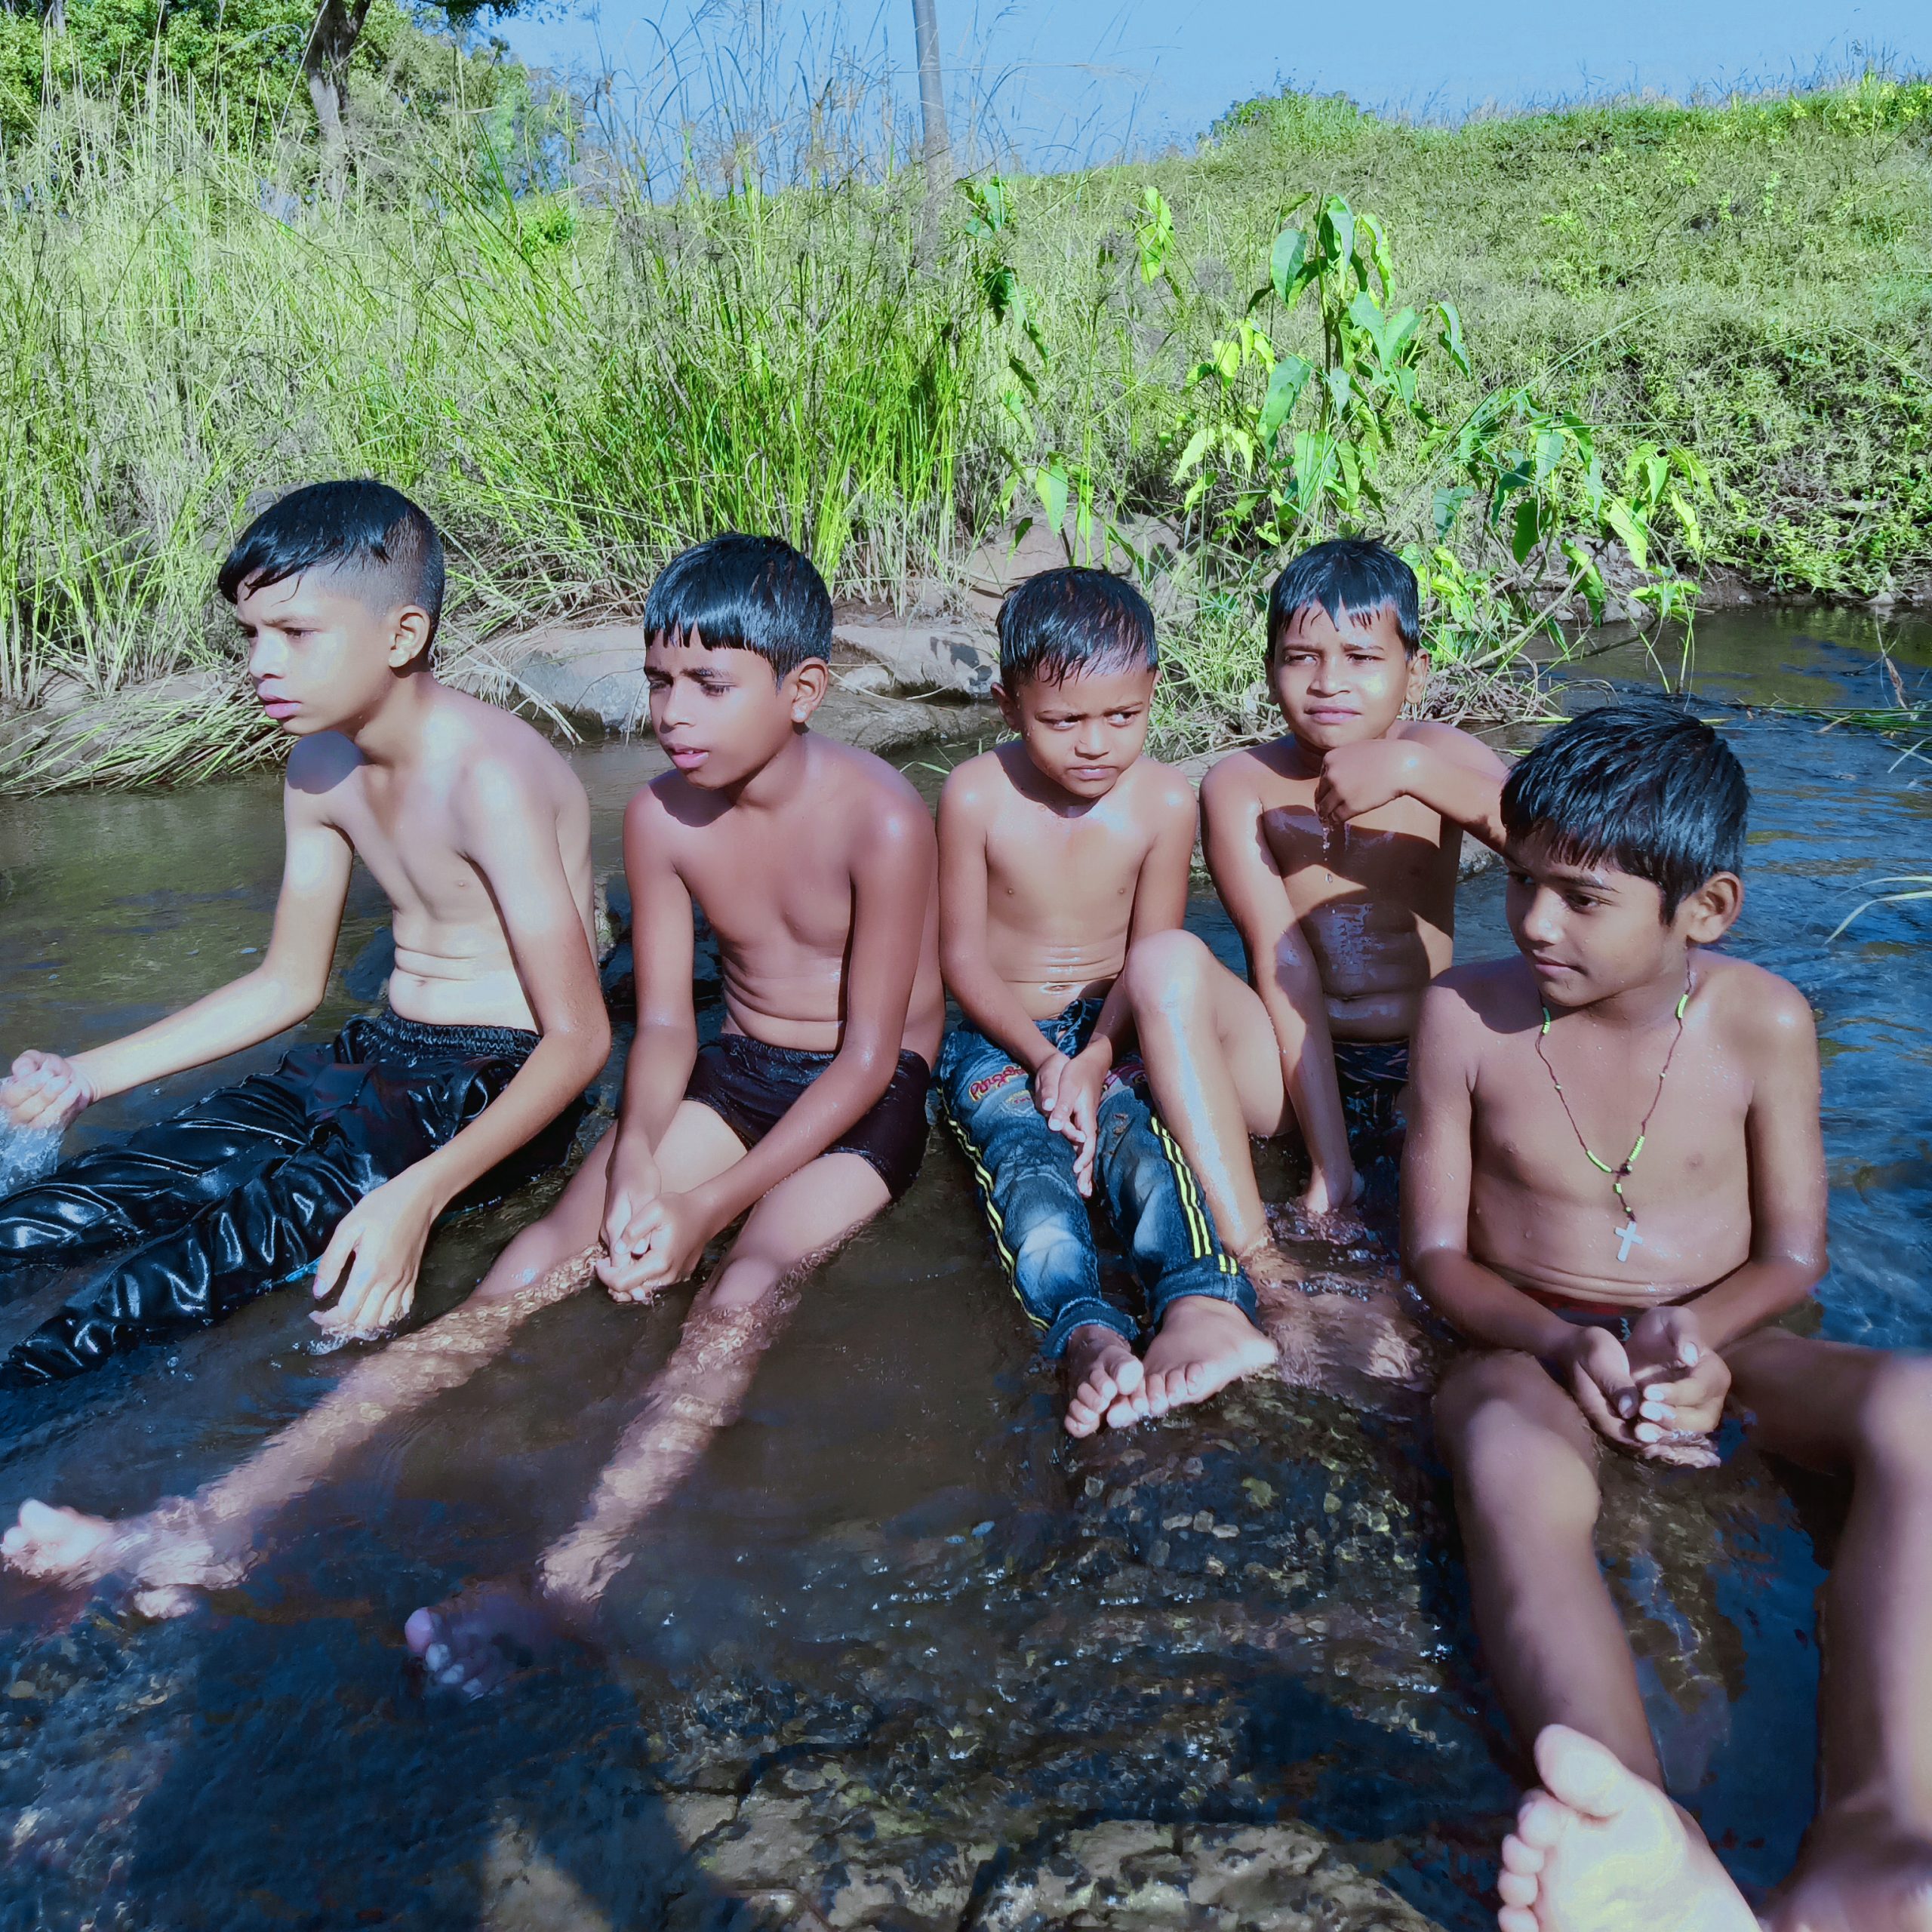 Little boys bating in shallow water river